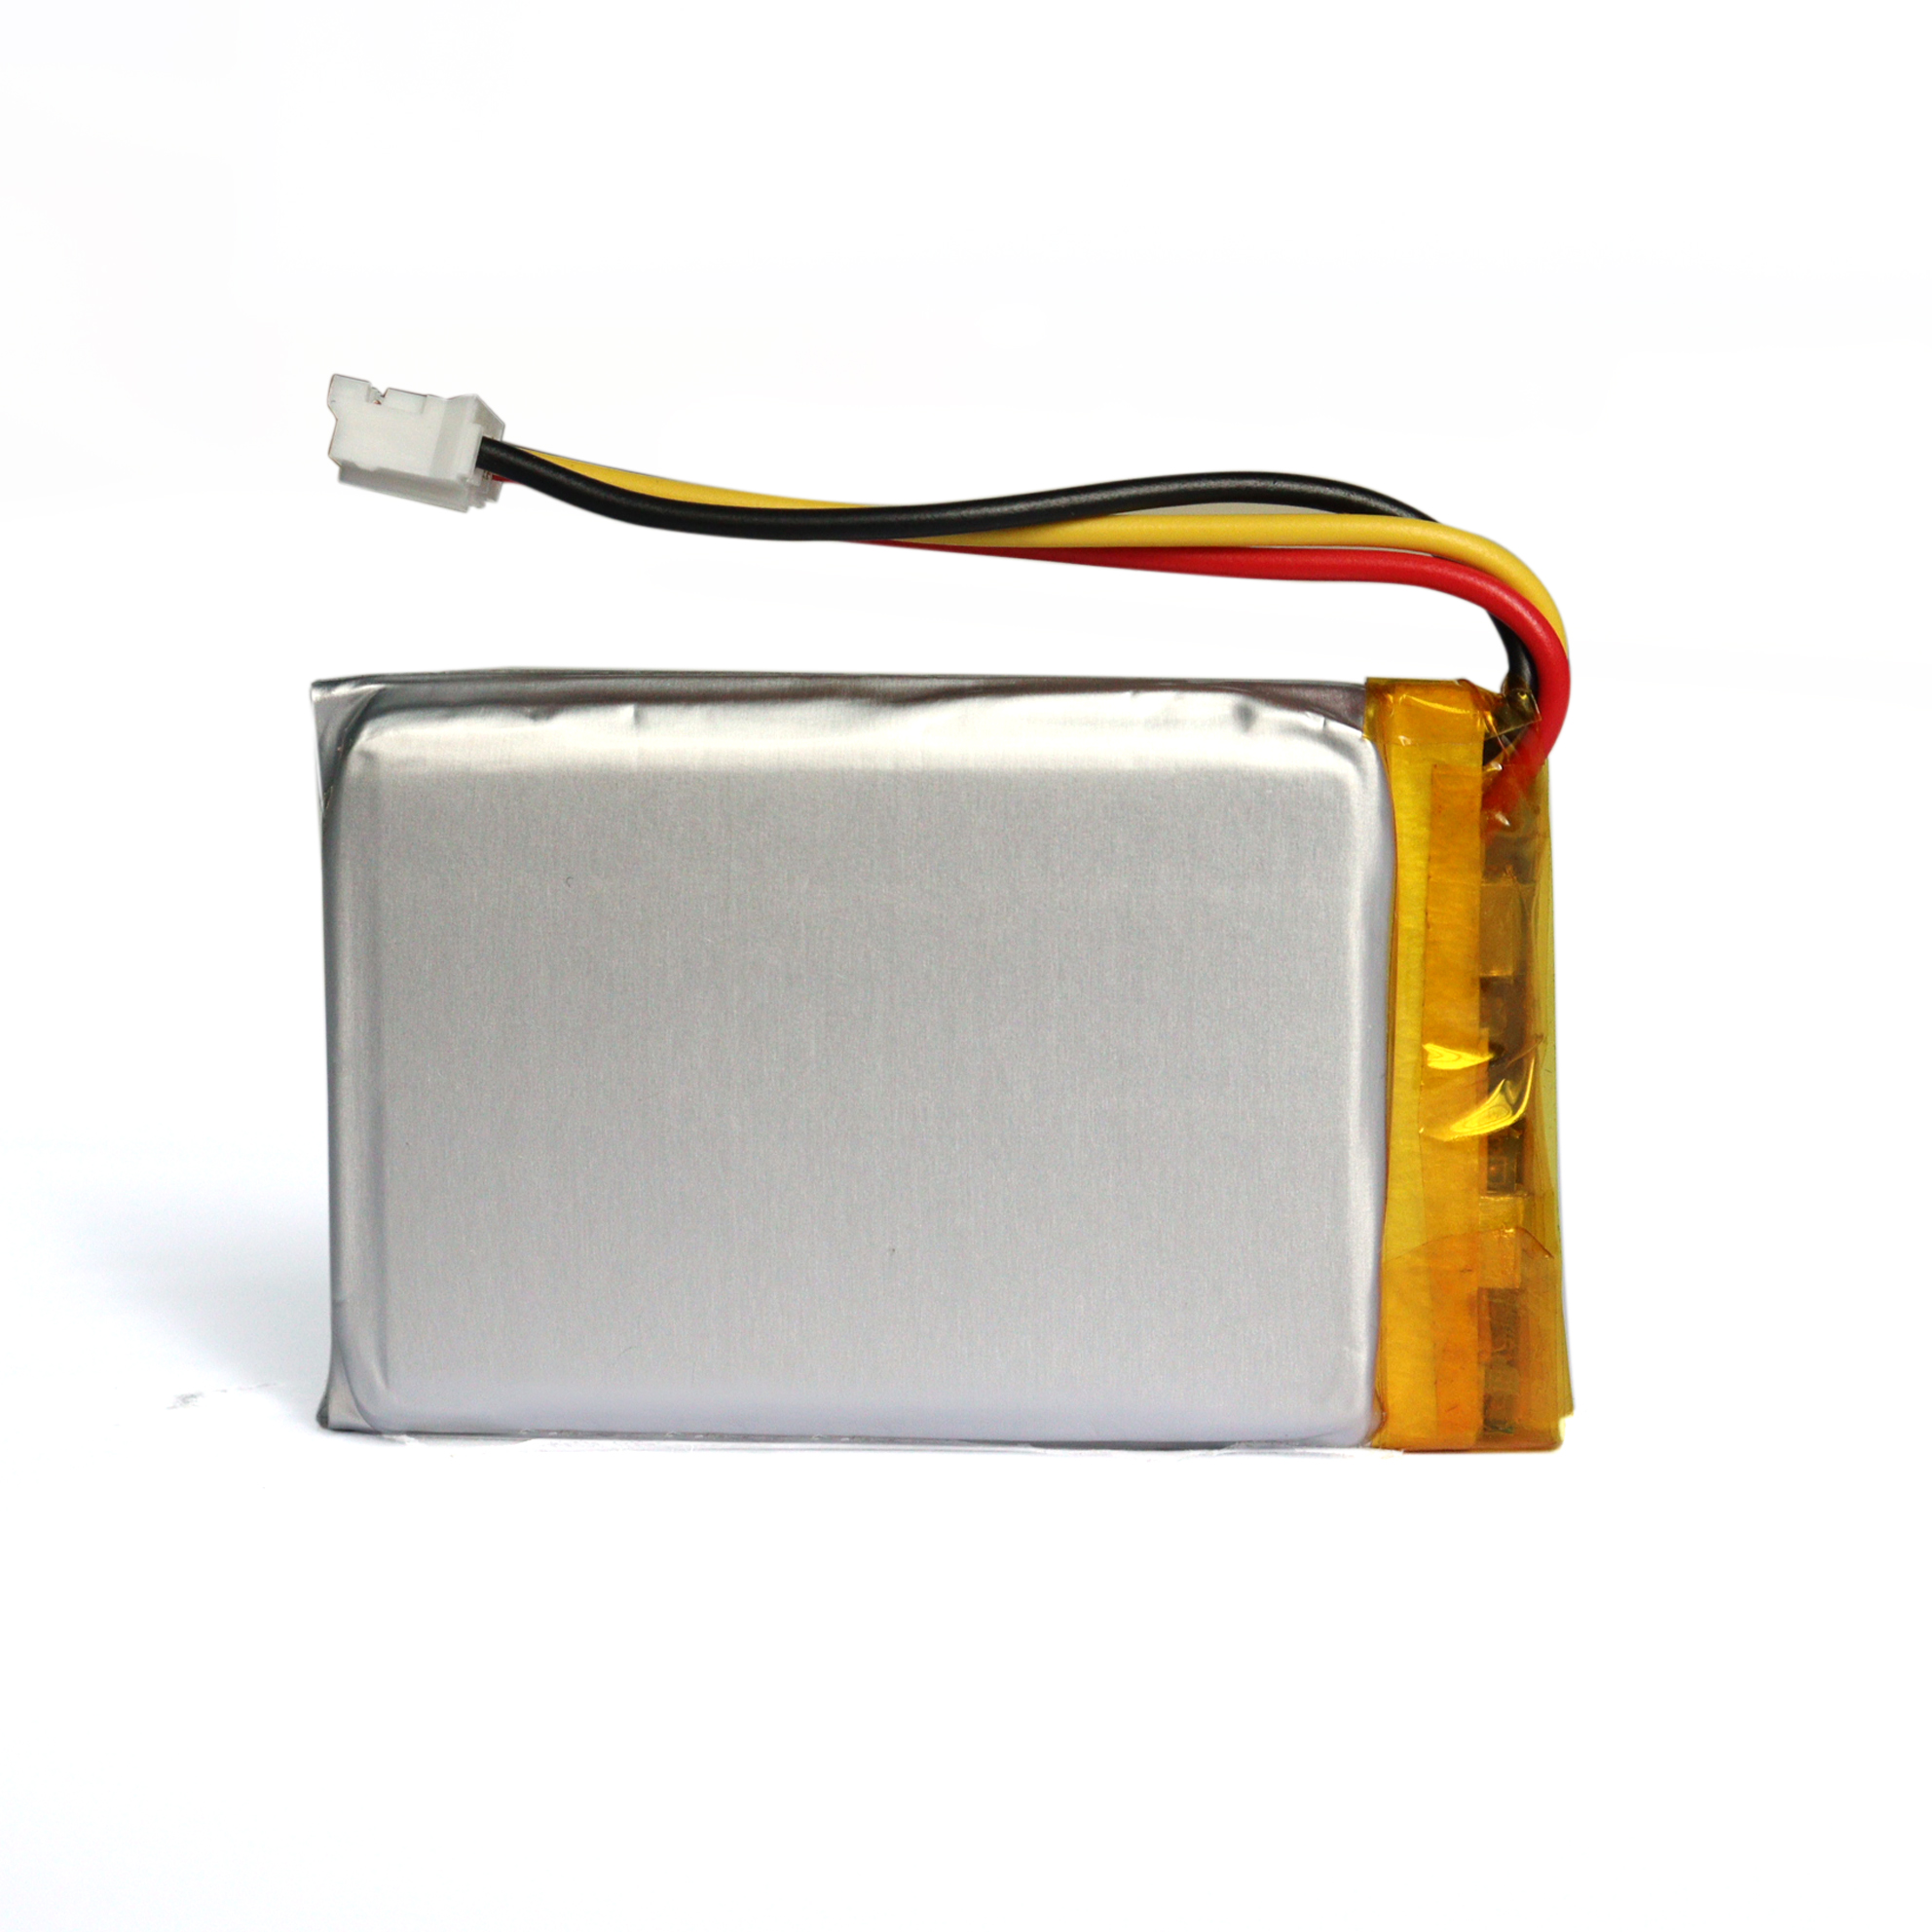 Lithium Polymer Battery 3.7V 1350mAh Pouch Type